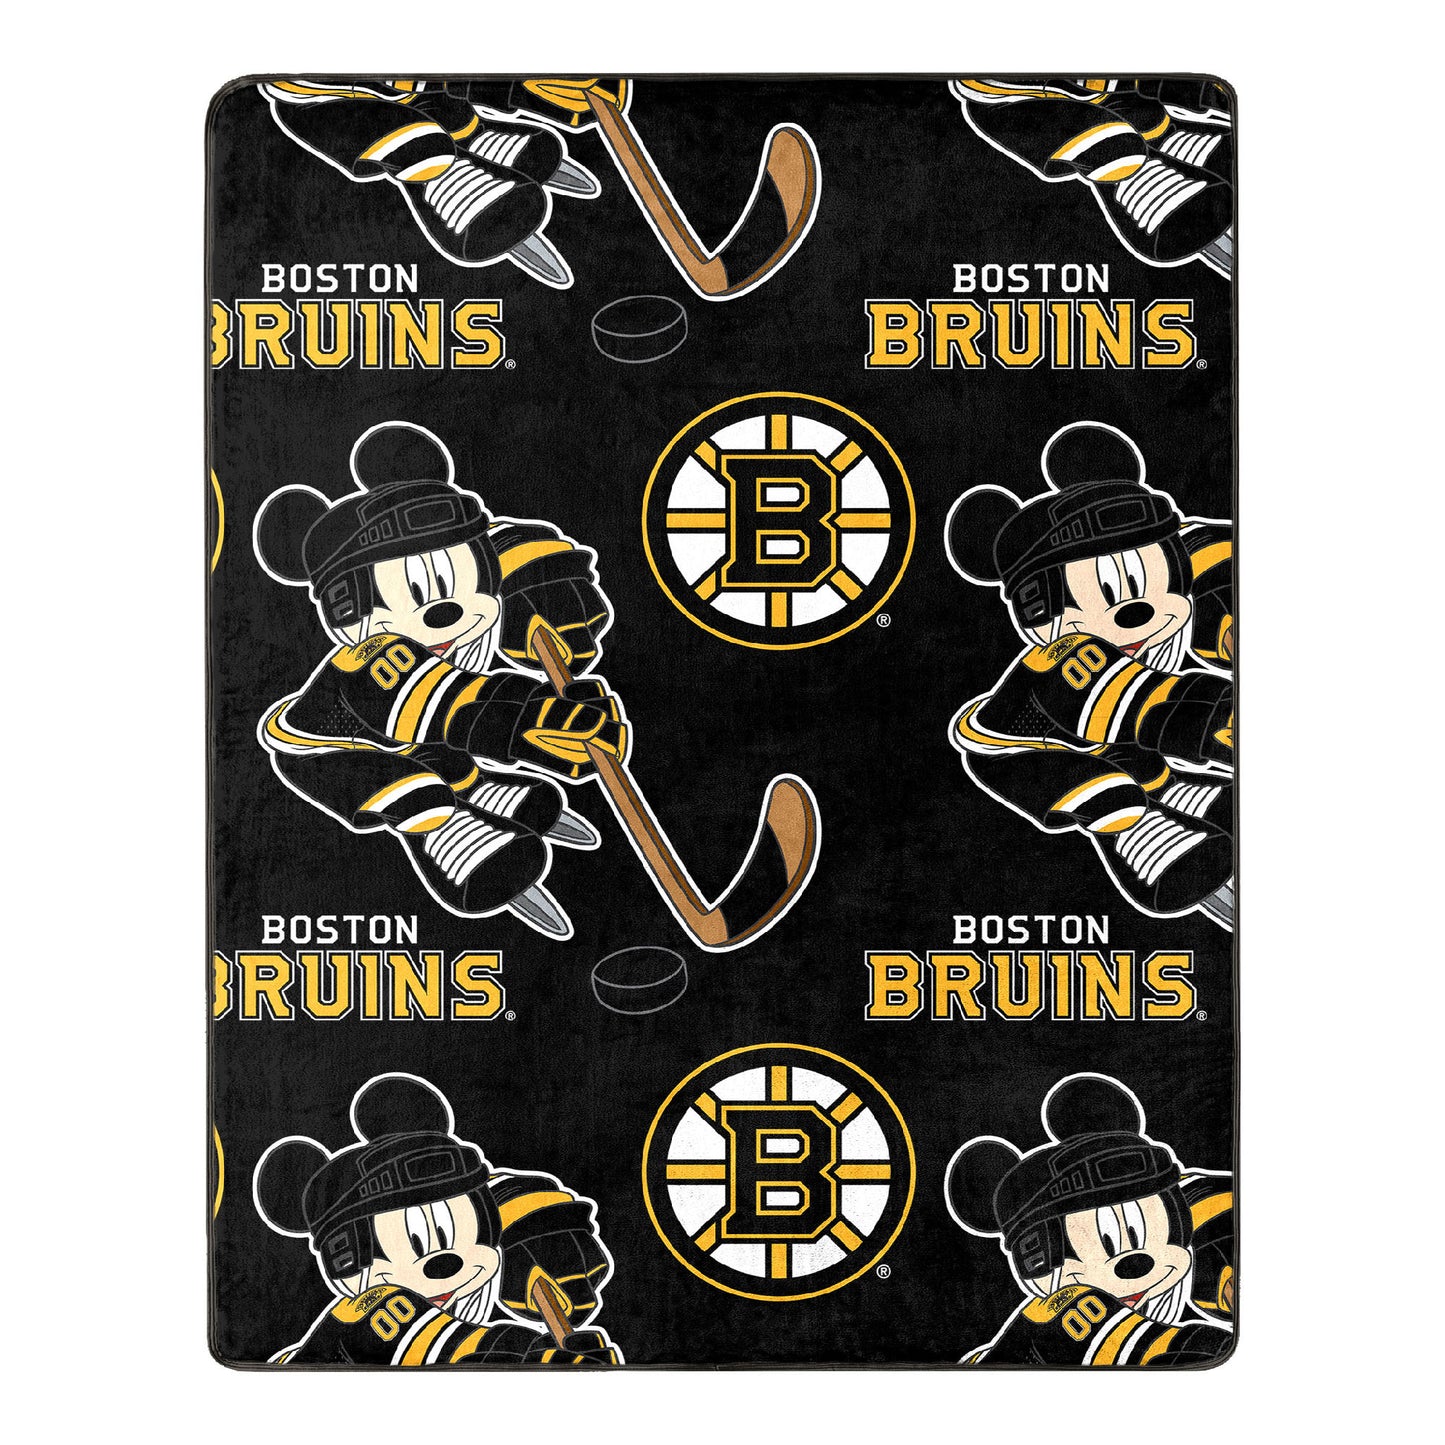 Bruins OFFICIAL NHL & Disney's Mickey Mouse Character Hugger Pillow & Silk Touch Throw Set;  40" x 50"